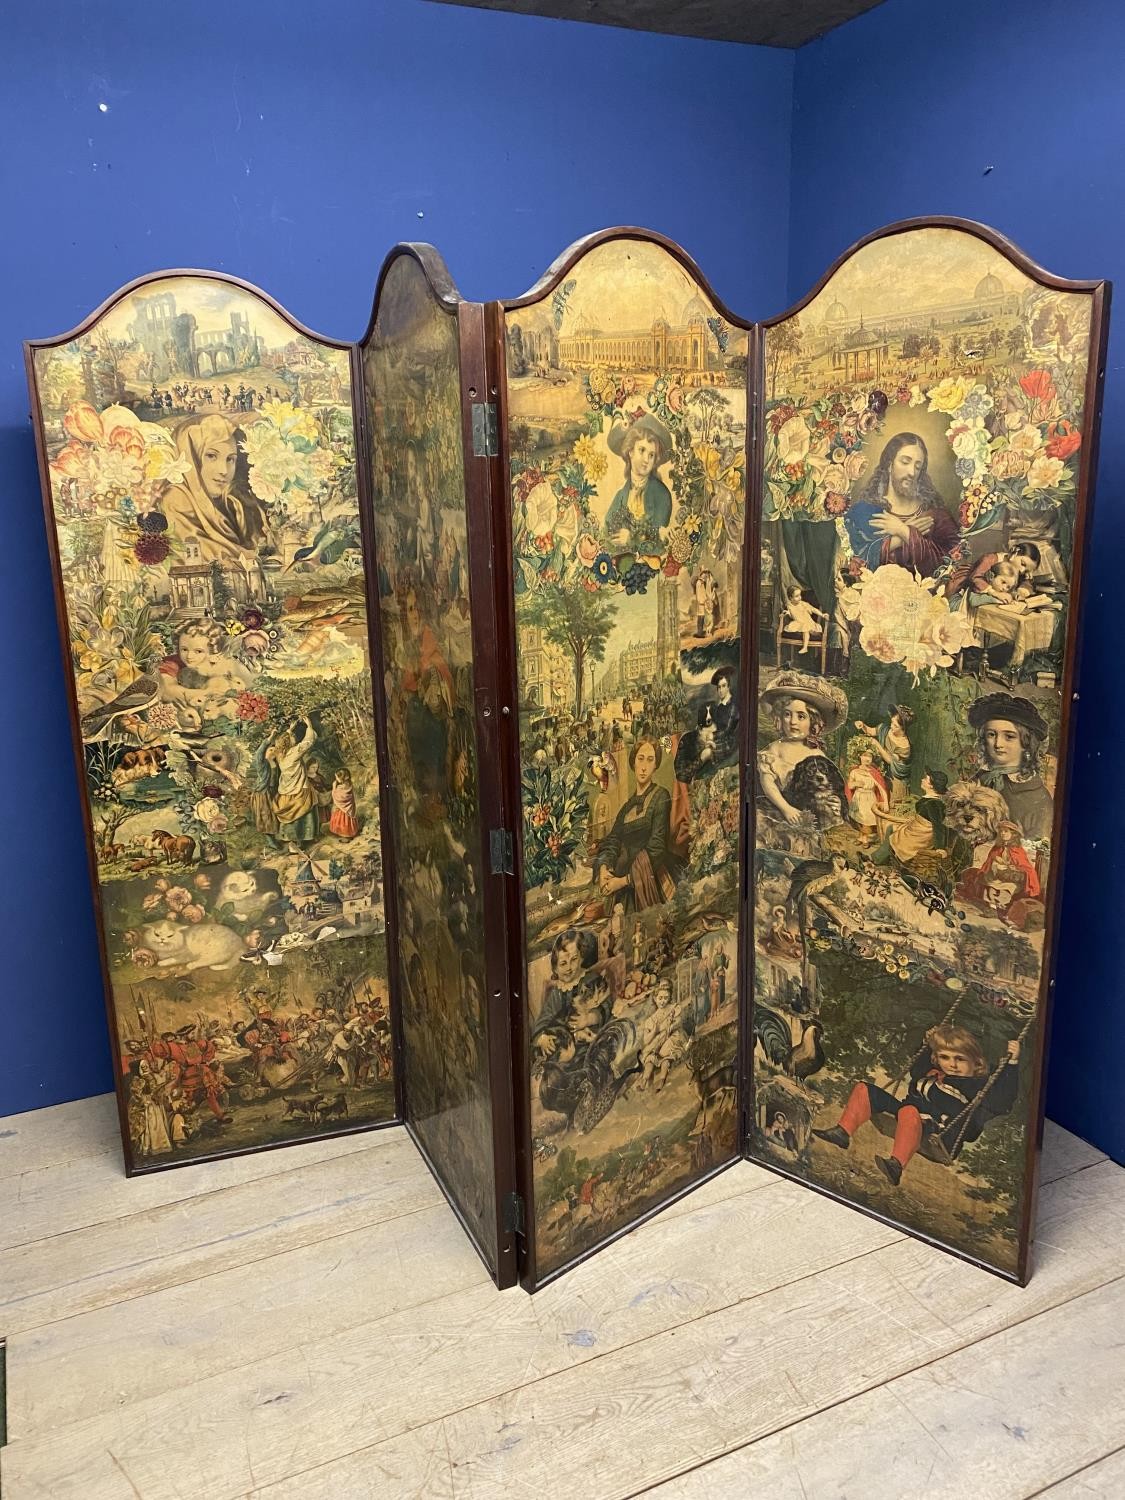 A four fold decorative screen, covered Decoupage with Victorian and Edwardian images, as found